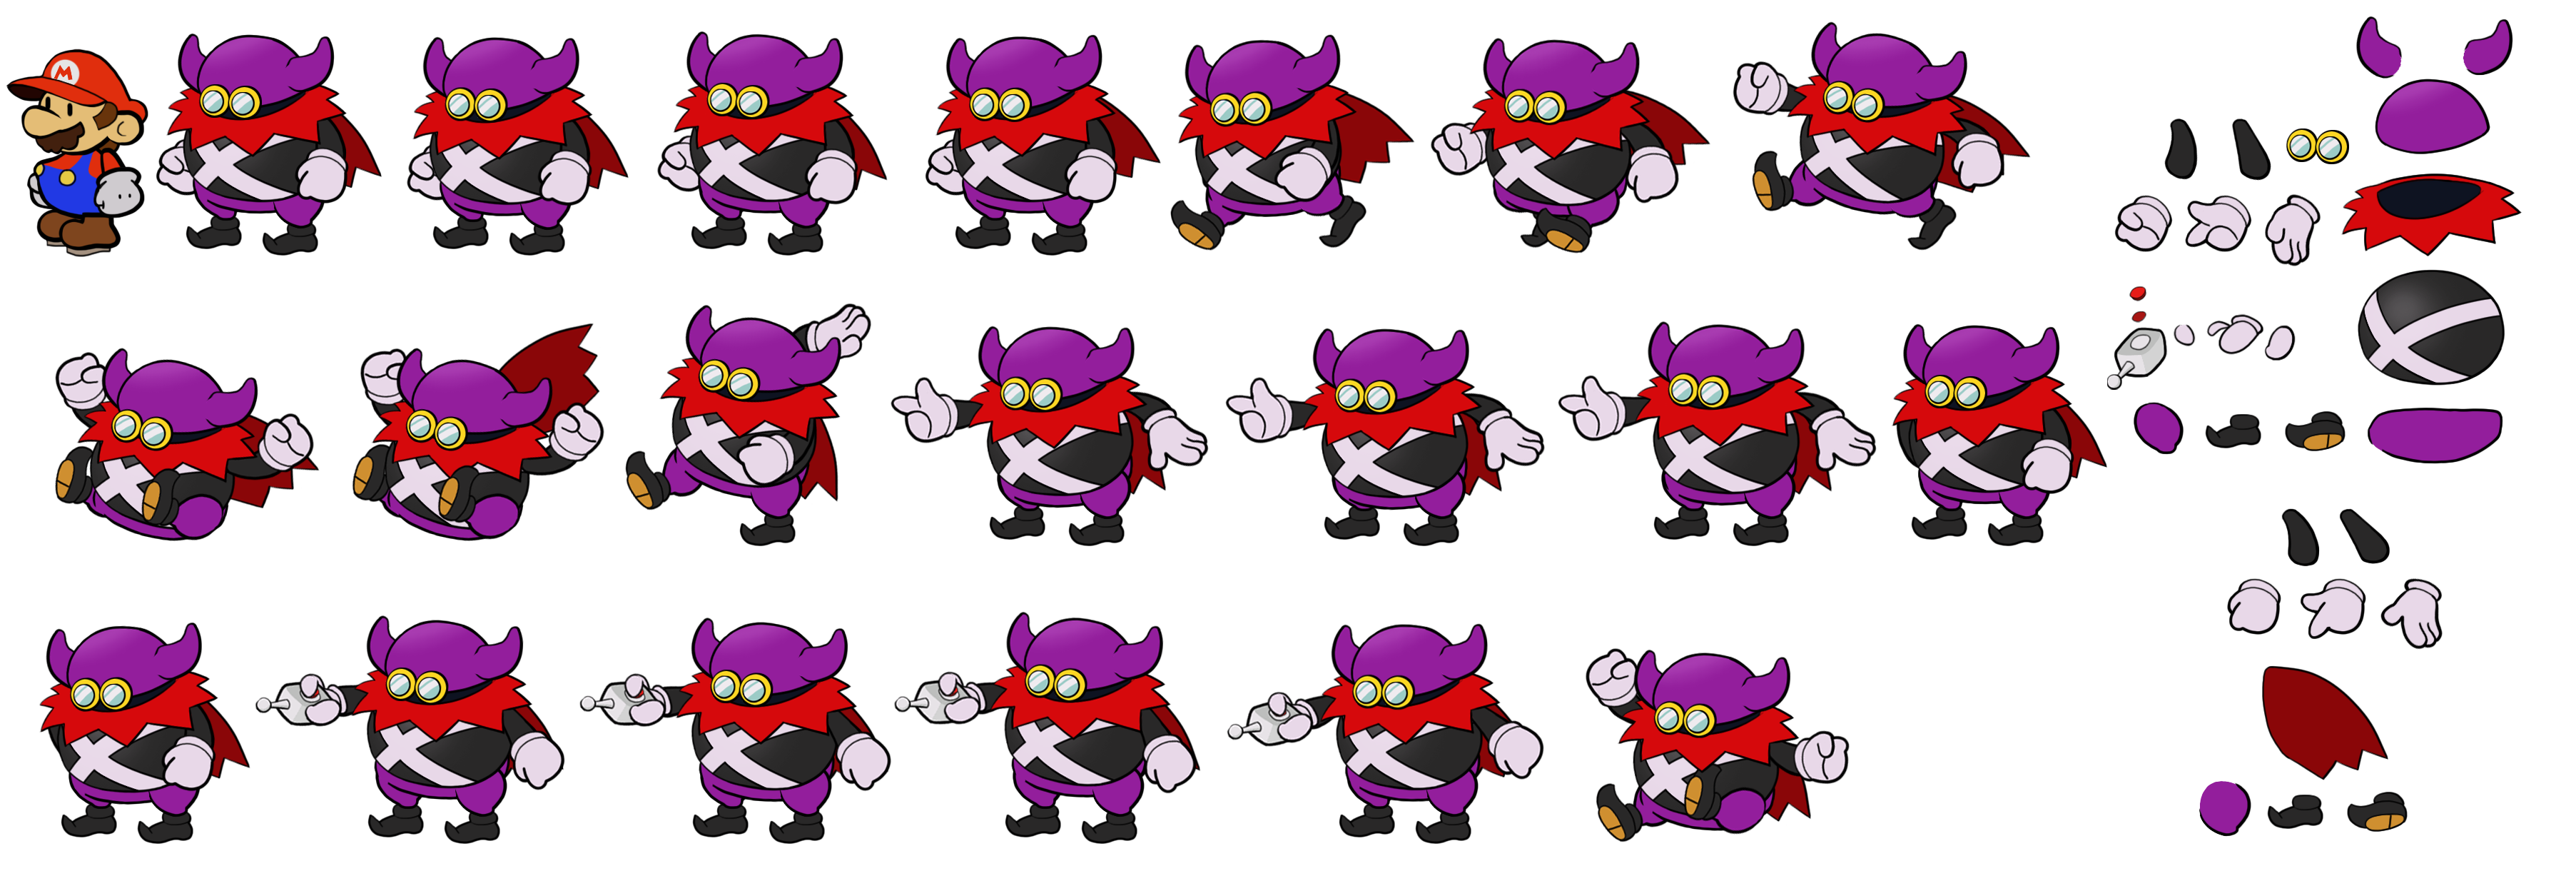 Lord Crump (Paper Mario-Style)